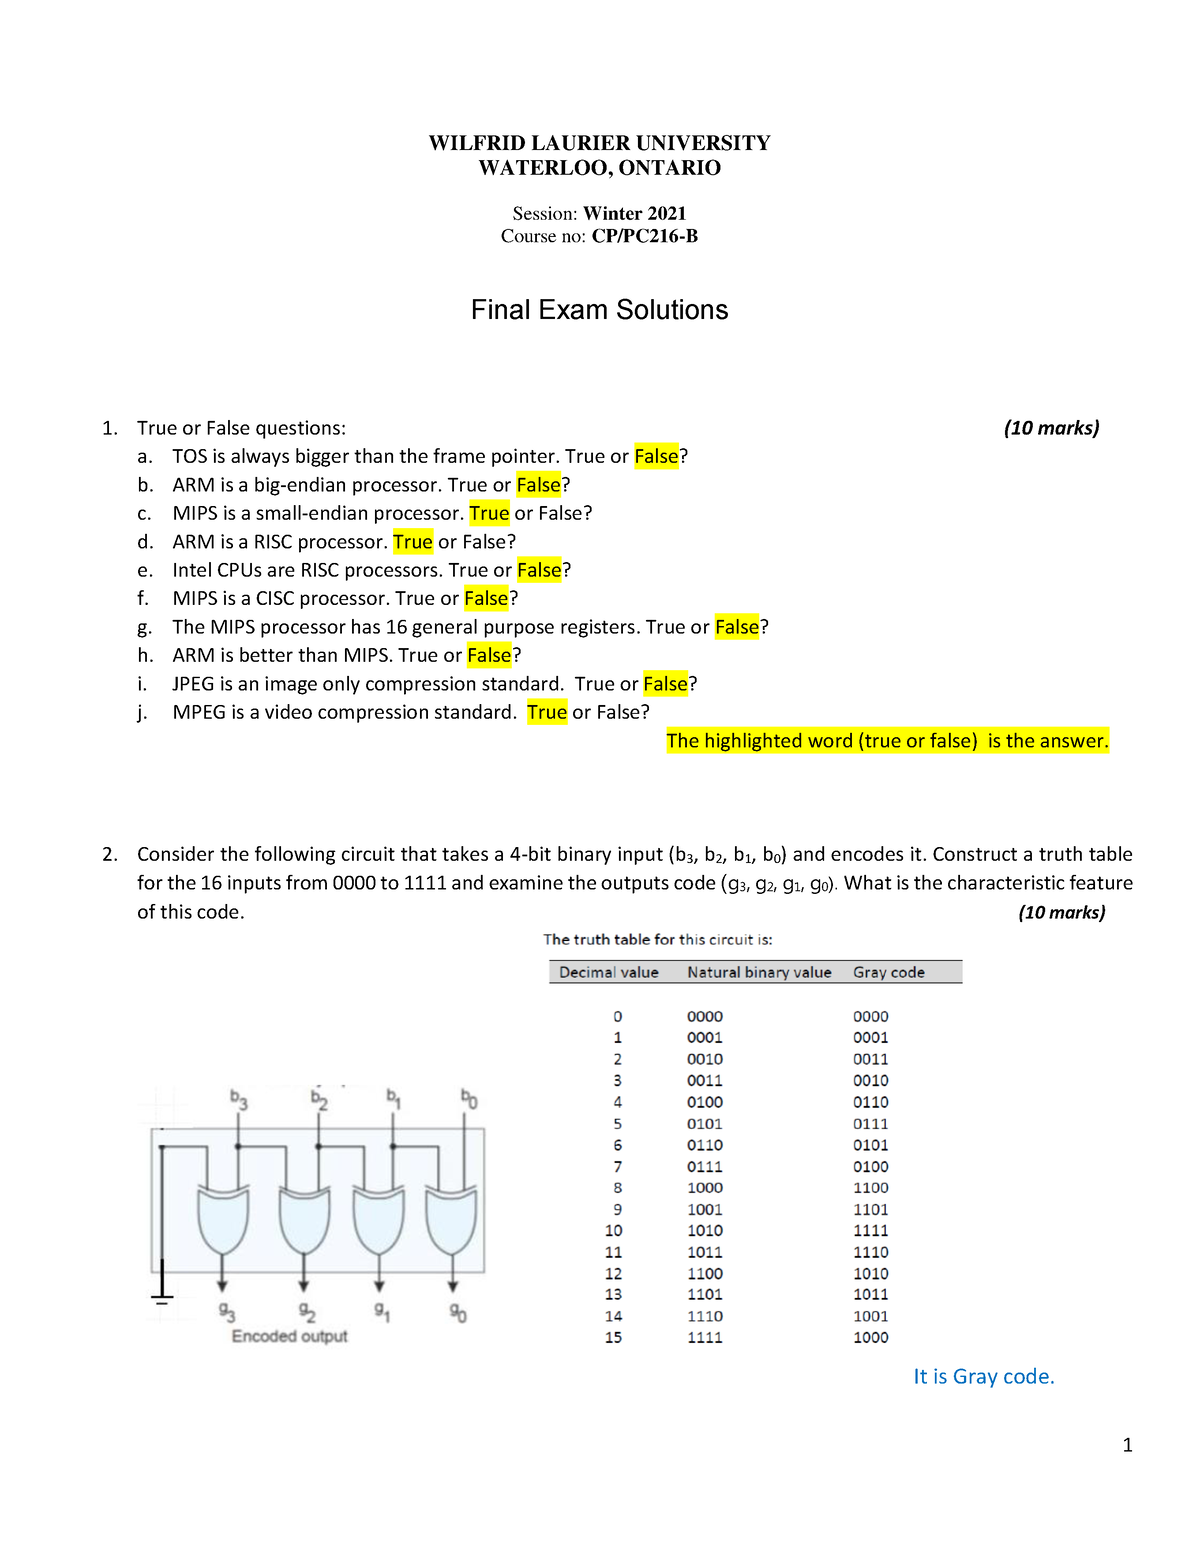 CP216FinalExamWinter2021 Solutions 1 solution WILFRID LAURIER